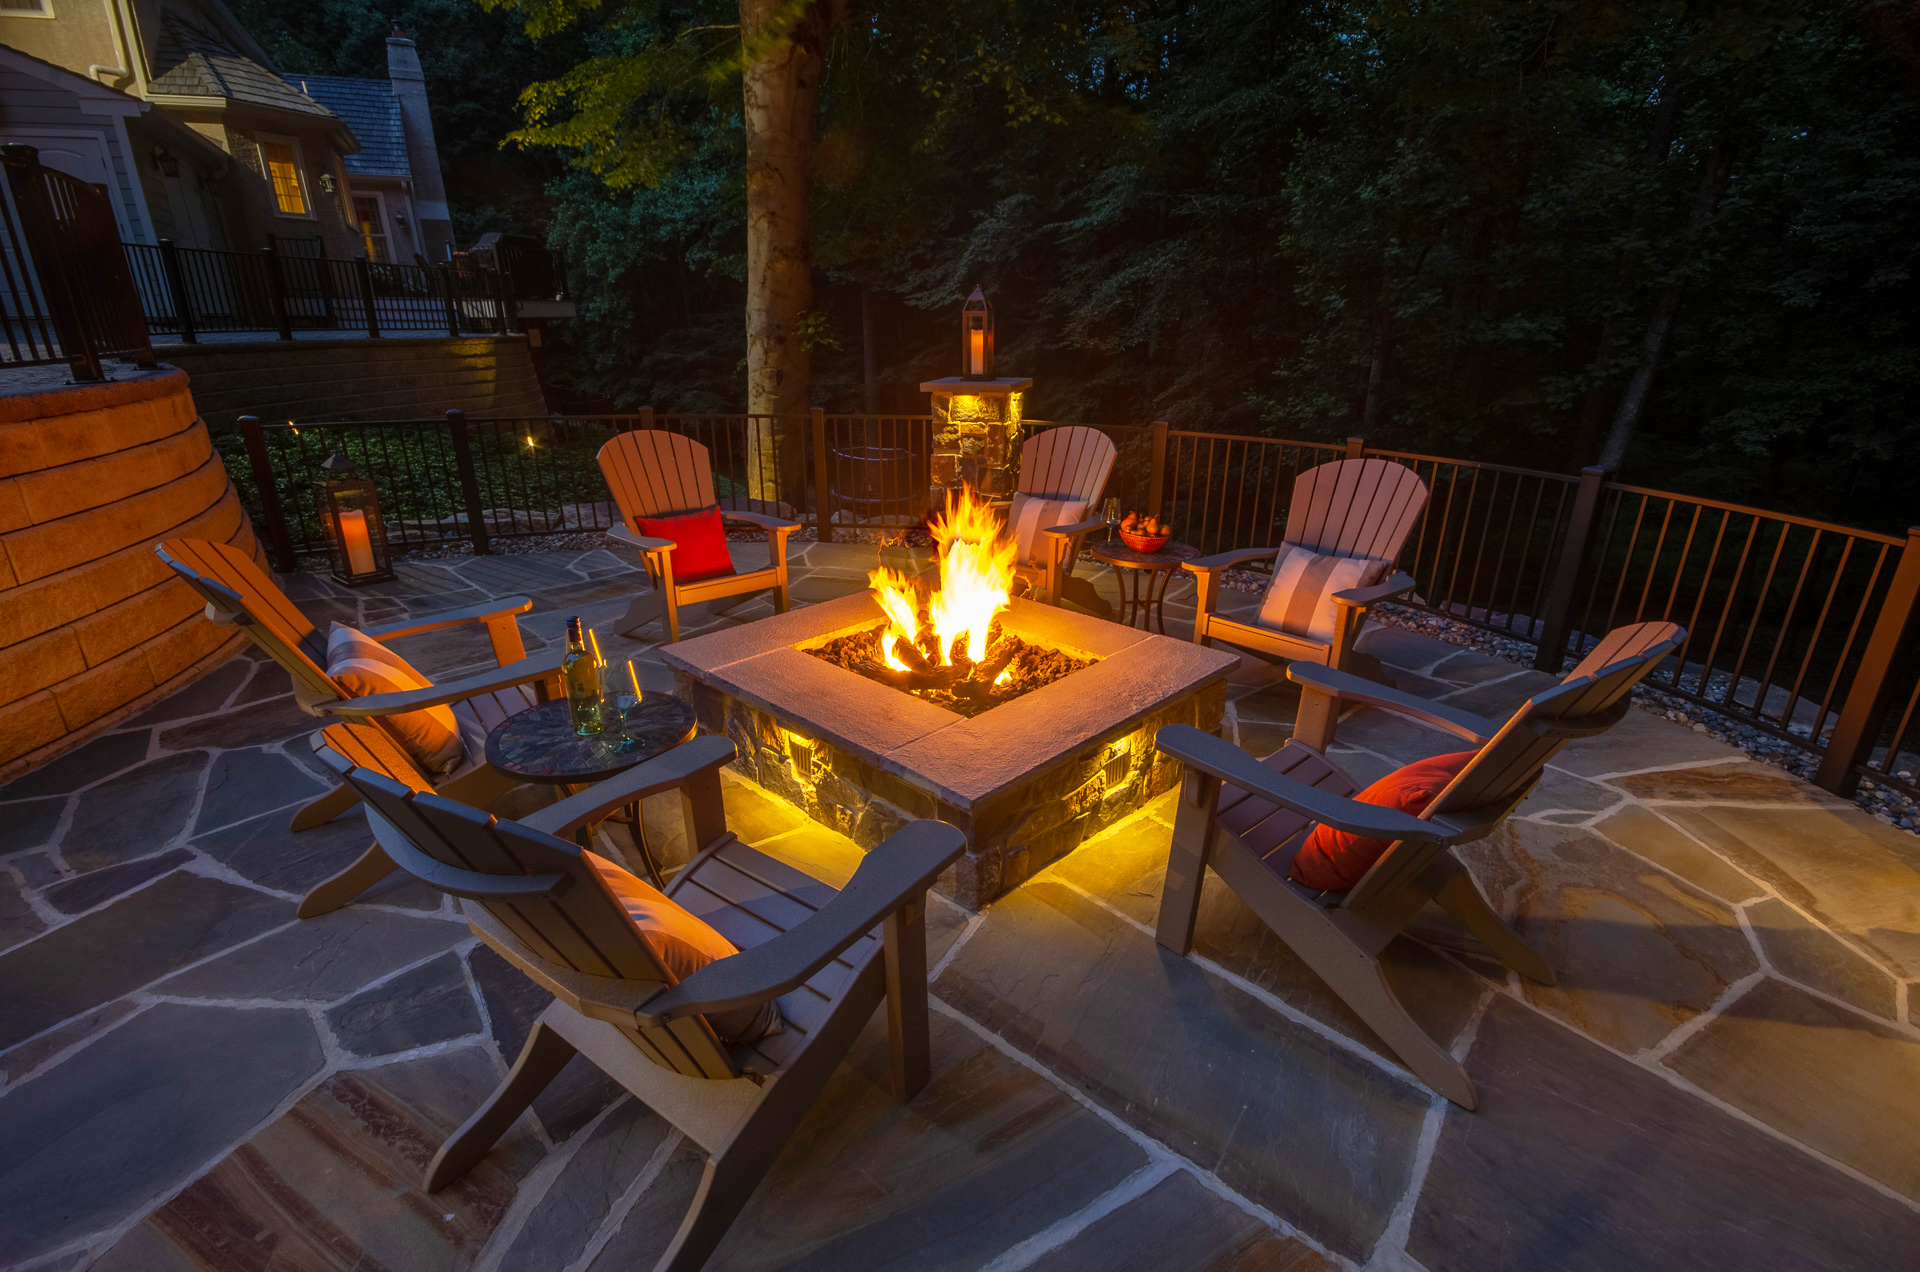 Outdoor Fireplaces Fire Pits Delaware, Ohio State Fire Pit